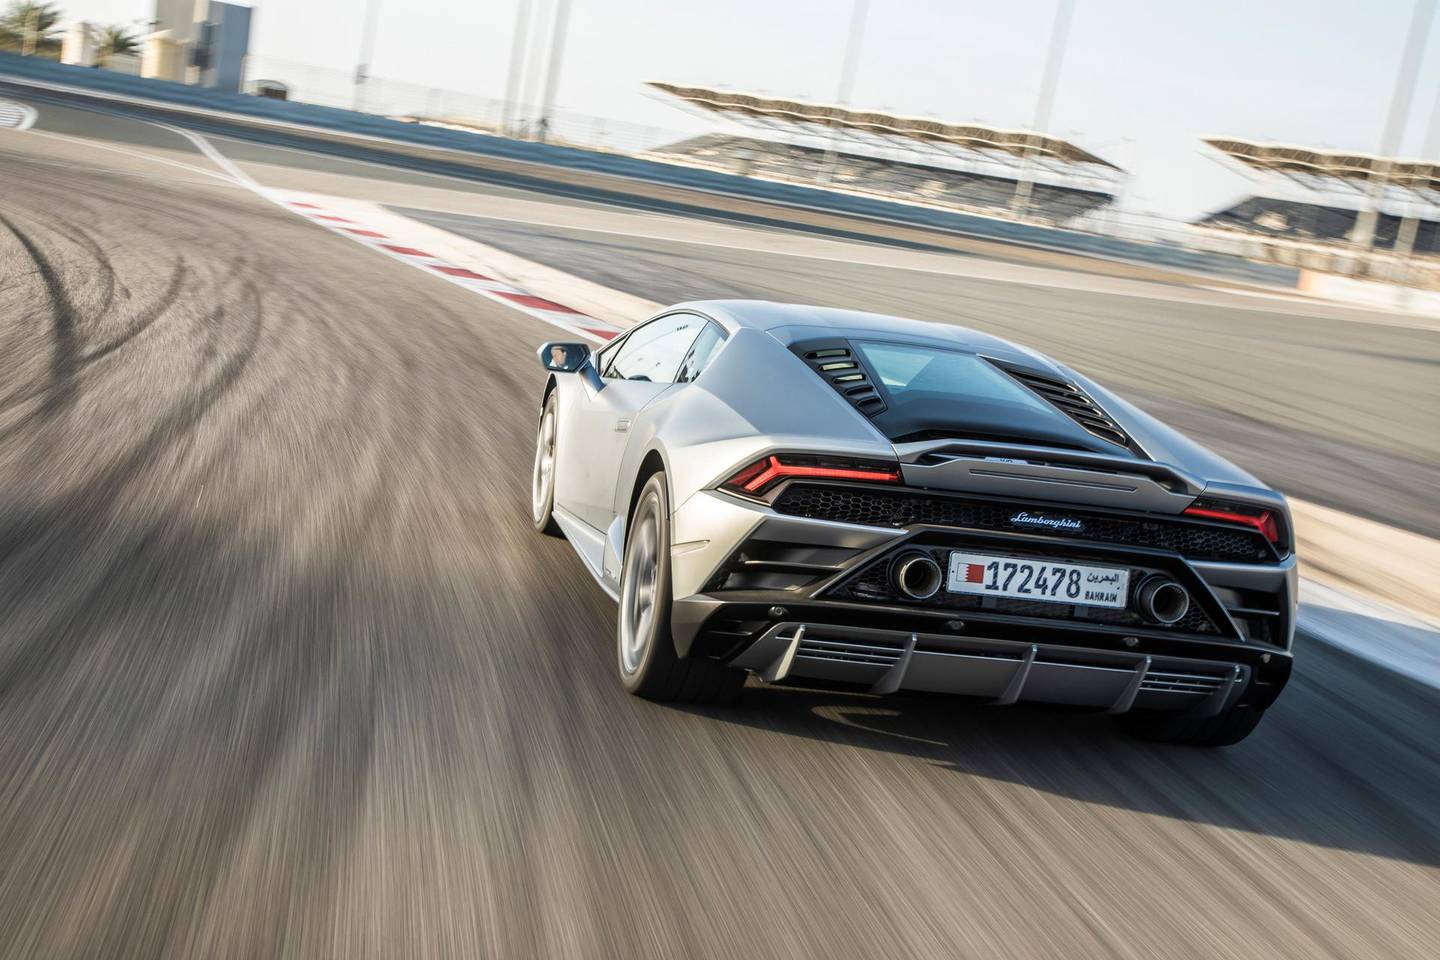 It can go from zero to 100kph time of 2.9 seconds, with just another 6.1 seconds taking it to 200kph. Courtesy Lamborghini